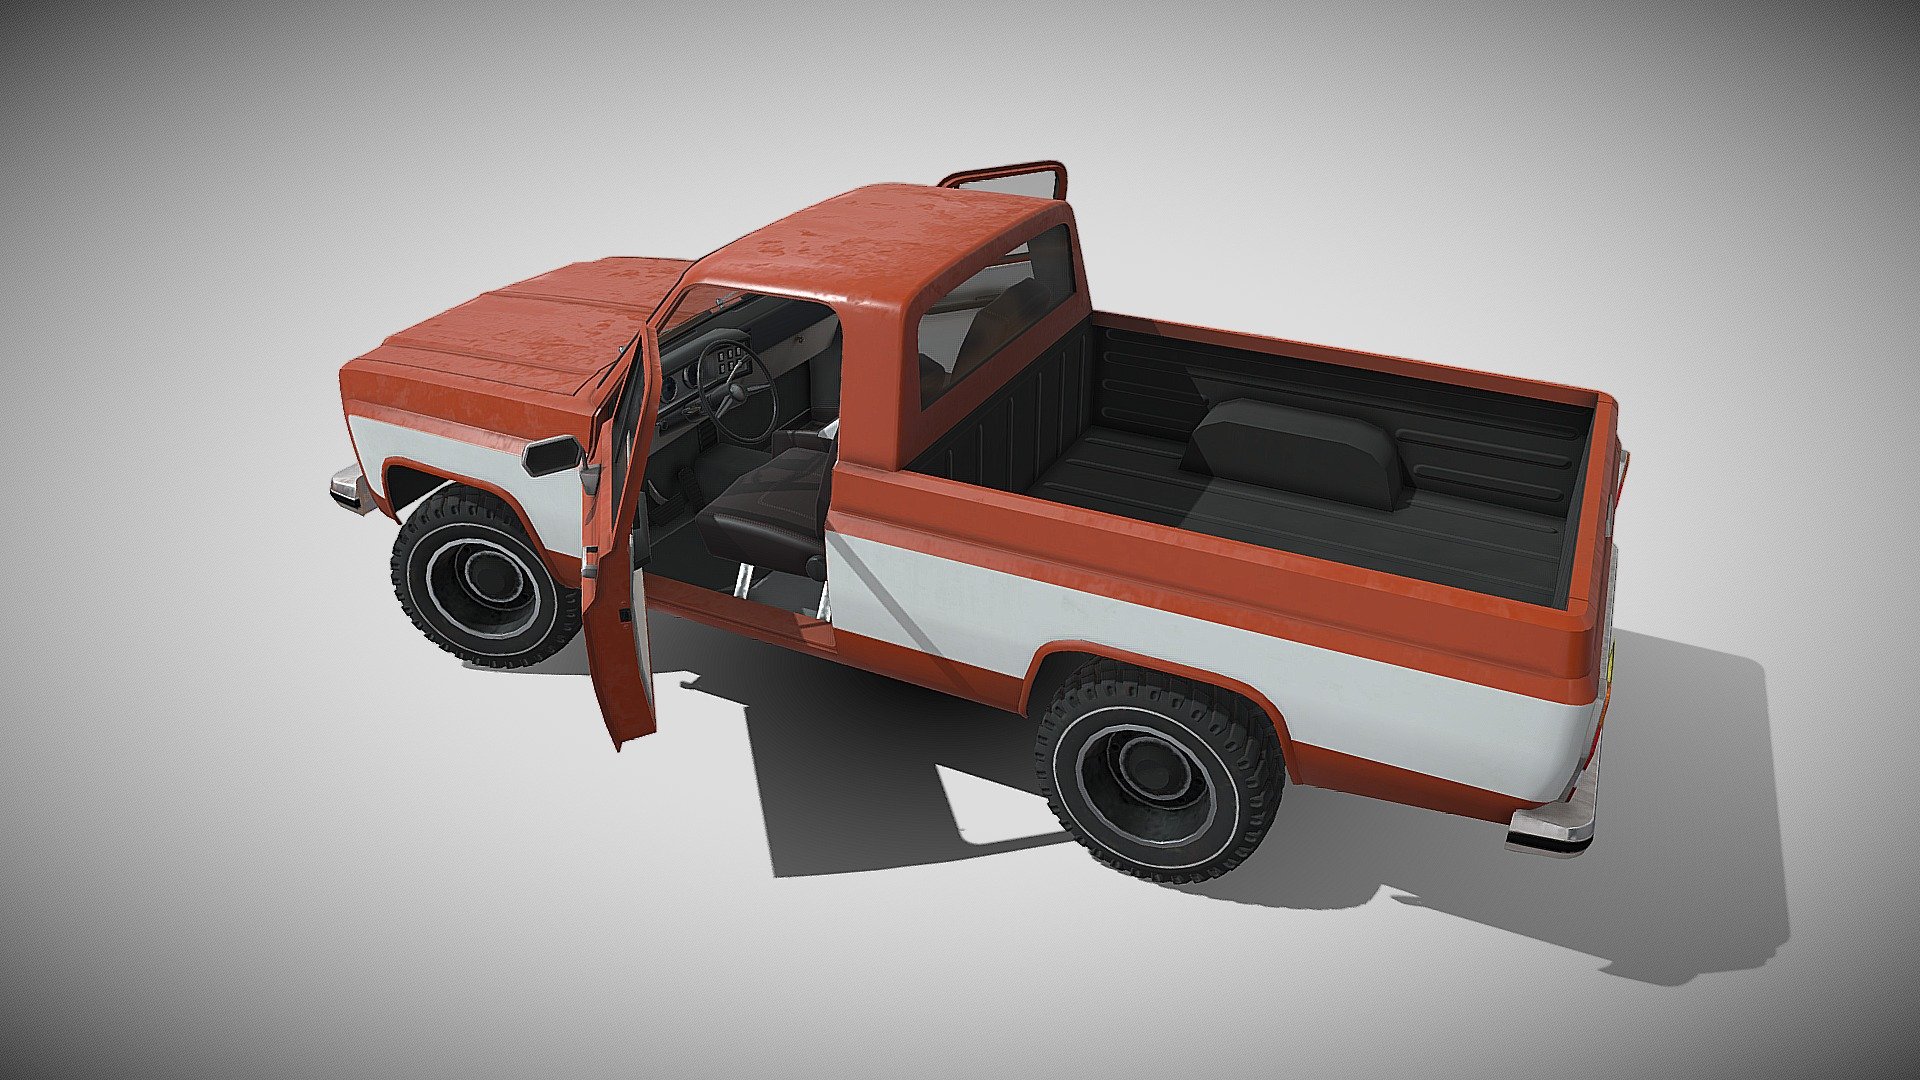 Lowpoly american pickup. Ready to use in game engines. Easy to apply to all kinds of car physics in Unity engine. The model is divided into parts: doors, glass, wheels and rear hood 3d model